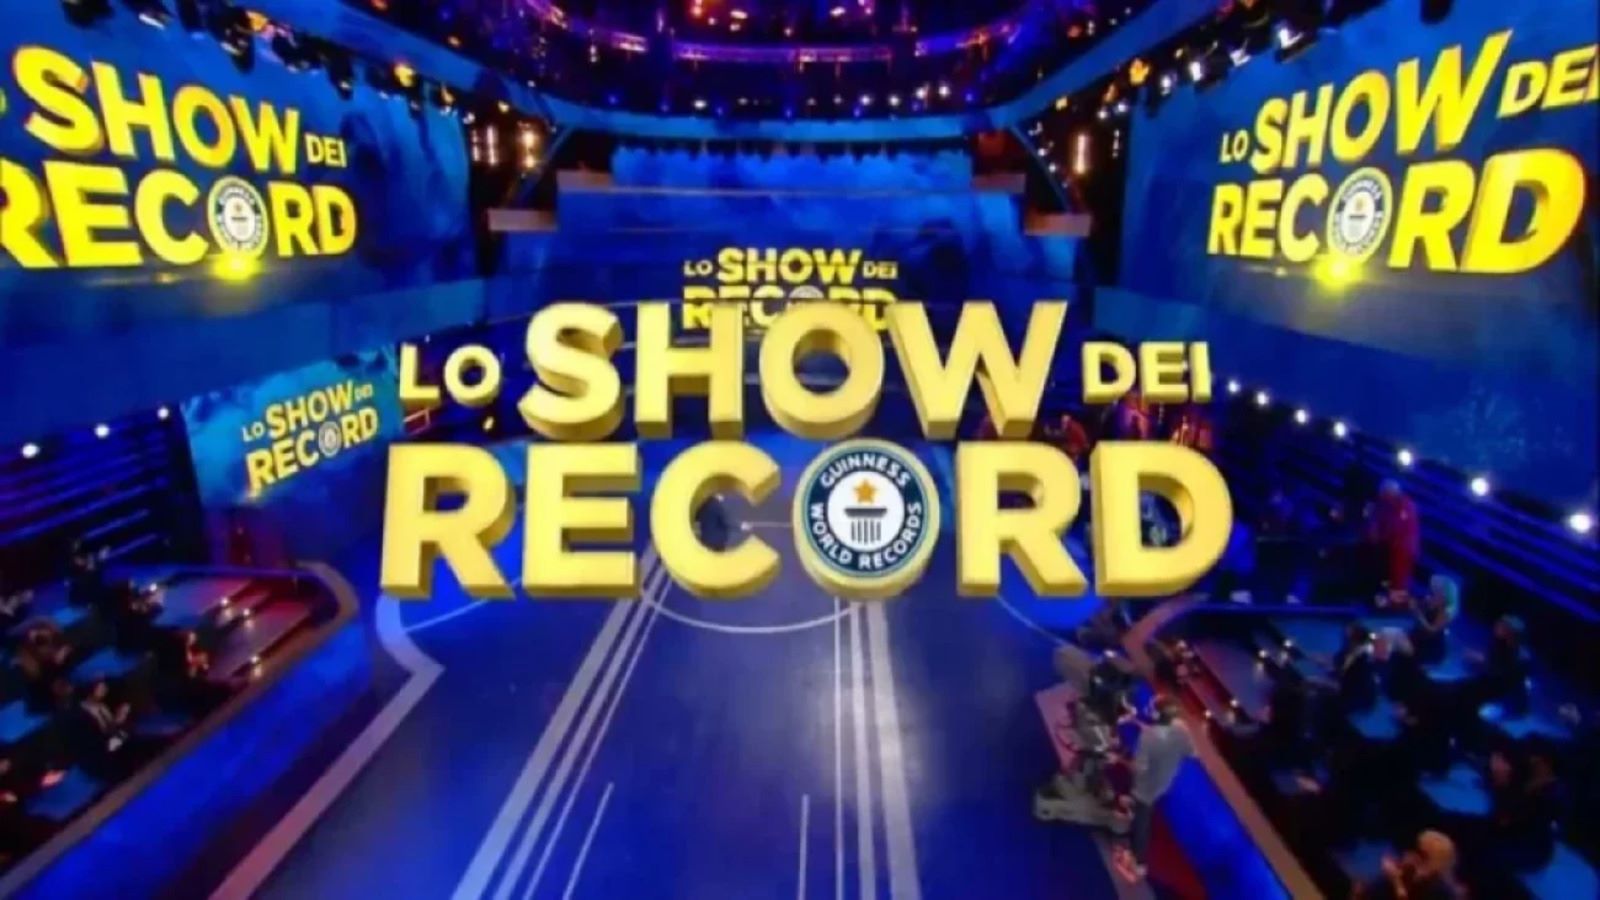 Lo Show dei Record with Gerry Scotti: discover the previews of the episode of April 16 on channel 5